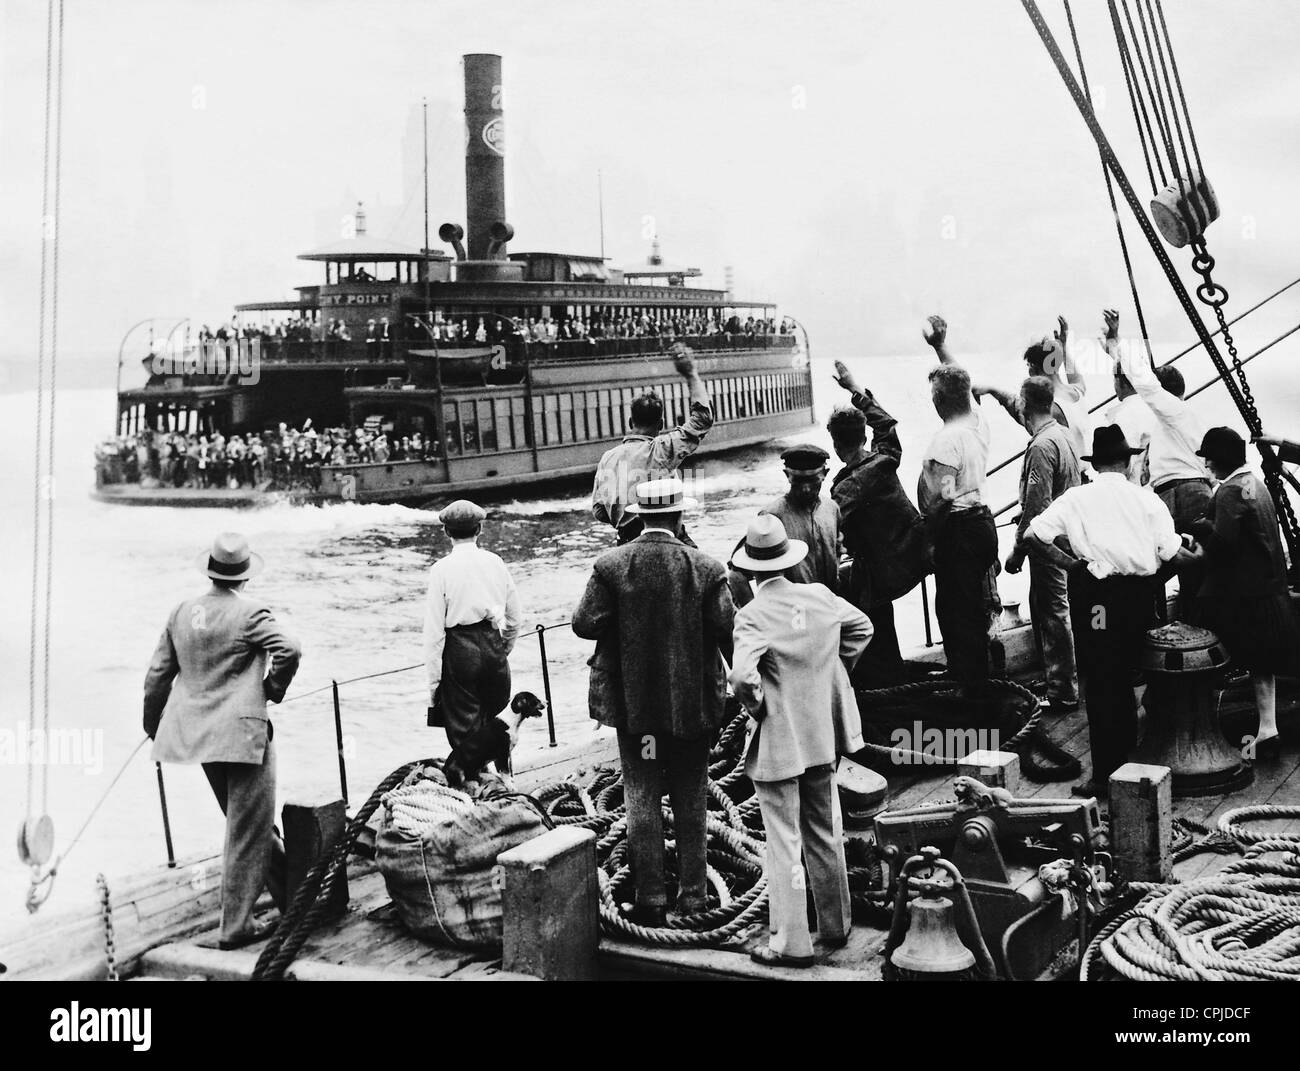 Crew of the 'S.S. City of New York' before the Antarctic trip in New York, 1928 Stock Photo